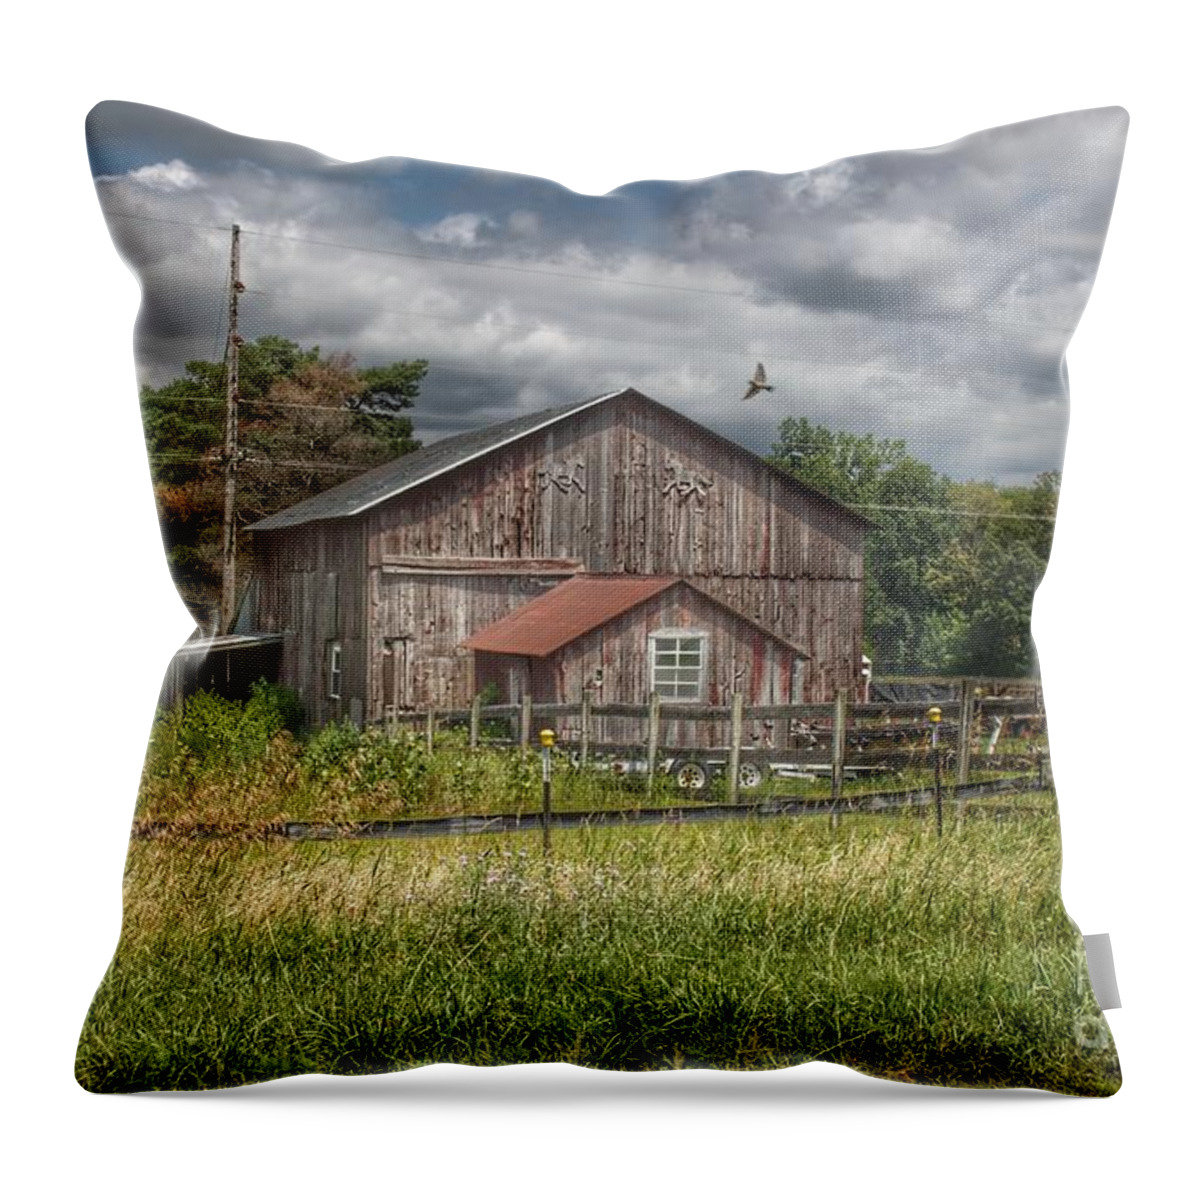 Barn Throw Pillow featuring the photograph 0355 - Millington Roads Grey Horse Barn by Sheryl L Sutter